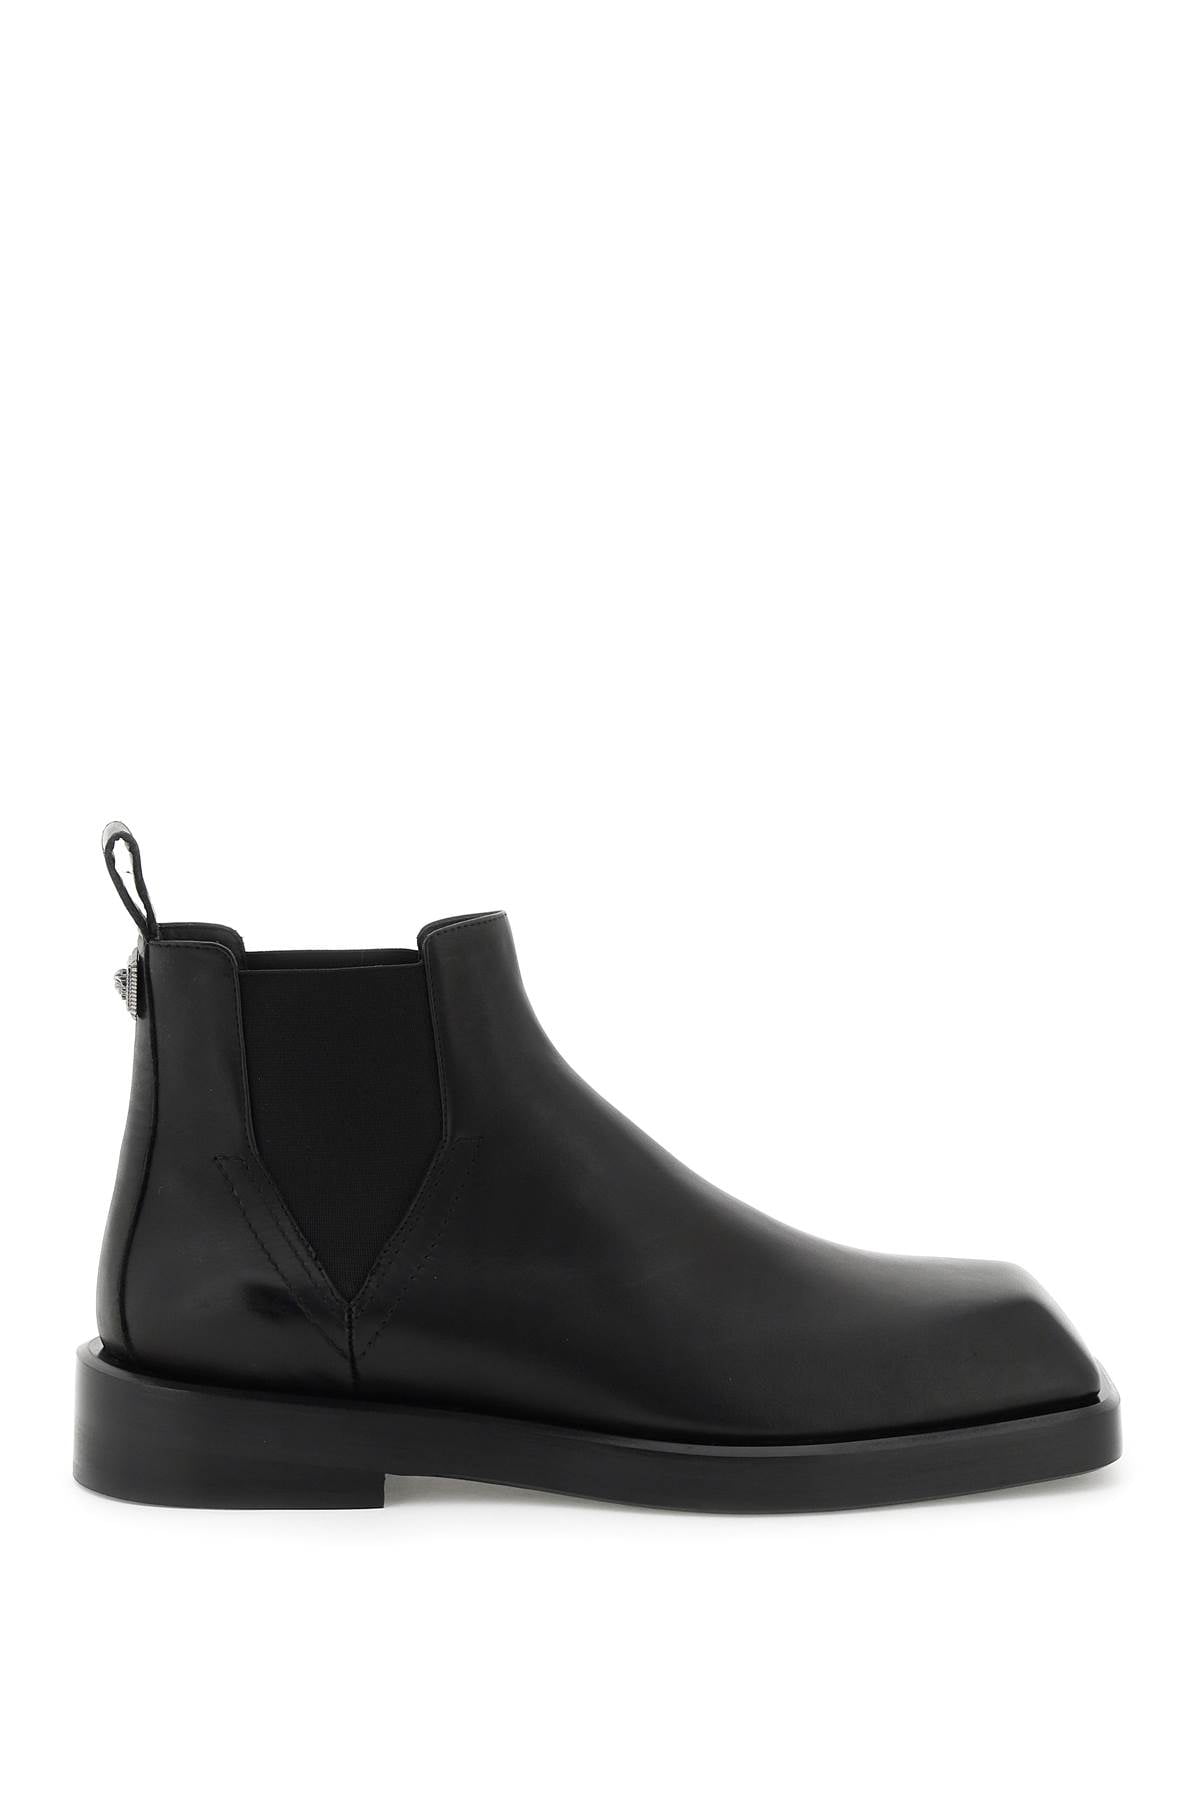 Versace Chelsea Boots With Squared Toe - Walmart.com